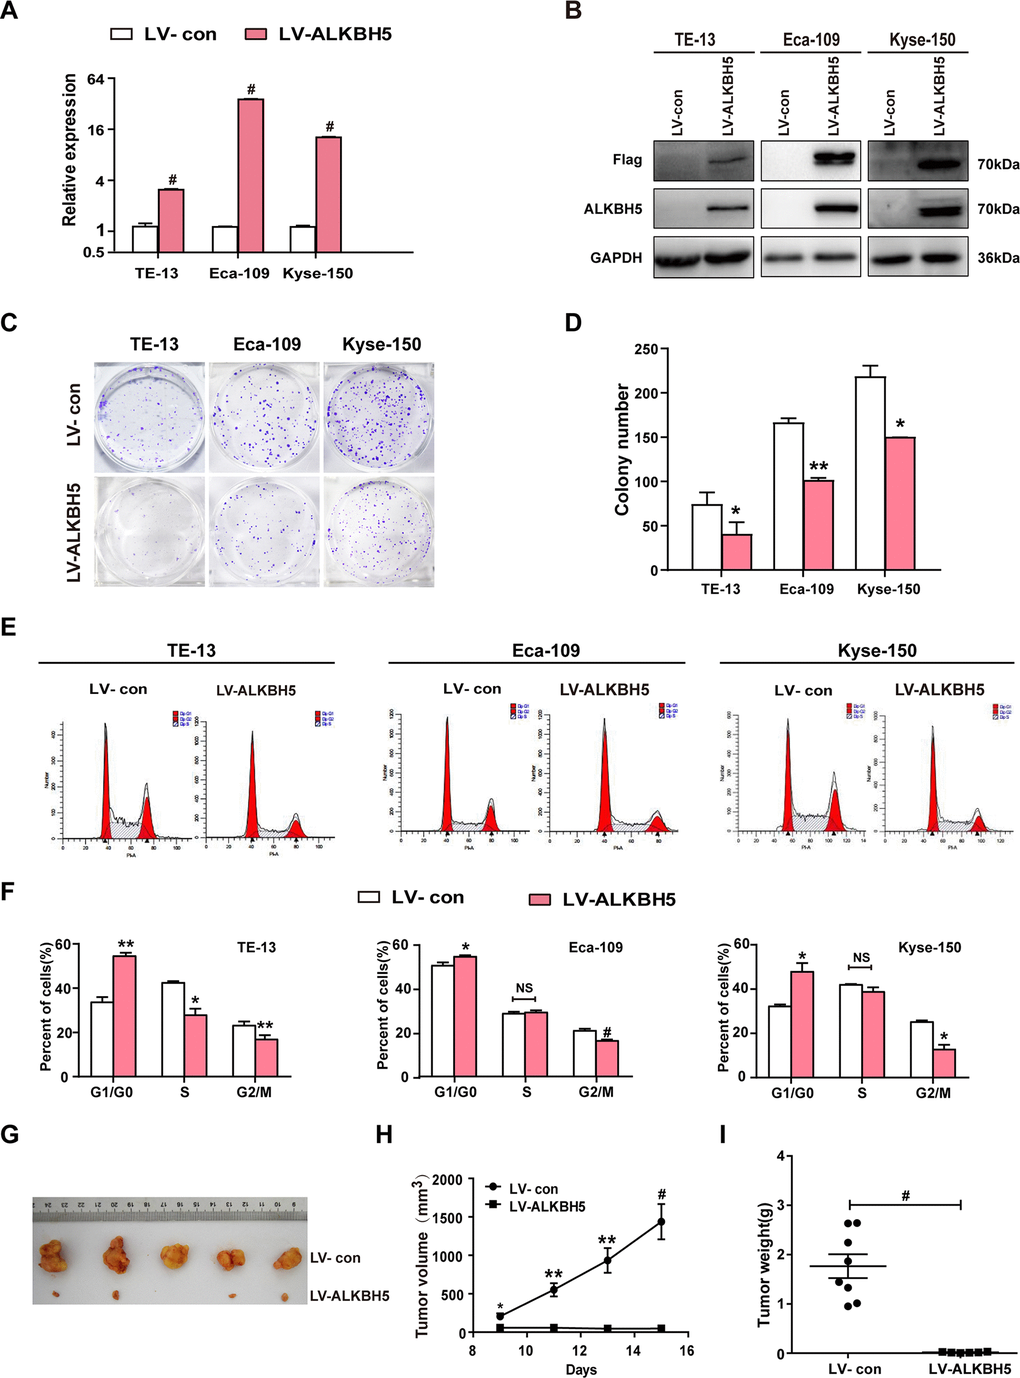 ALKBH5 overexpression suppressed in vitro proliferation and in vivo tumorigenesis of ESCC cells. (A, B) qRT-PCR (A) and western blot (B) analysis of ALKBH5 expression in vector-expressing (LV-con) and ALKBH5-expressing (LV-ALKBH5) ESCC cells (i.e., TE-13, Eca-109, and KYSE-150 cells). (C, D) A colony formation assay was performed to study the proliferation ability of vector- and ALKBH5-expressing ESCC cells. Left panels show representative images of colony formation assay (C) and right panels signify the total colony count (D). (E, F) Effects of ALKBH5 overexpression on cell cycle distribution in TE-13, Eca-109, and KYSE-150 cells. (G–I) ALKBH5 overexpression suppressed tumor growth of Eca-109 cells in nude mice. Vector- or ALKBH5-expressing Eca-109 cells were subcutaneously injected into the left and right dorsal thighs of mice, respectively. (G) Representative image of tumors formed. (H) Growth curve of tumor volumes. (I) Tumors were weighed.